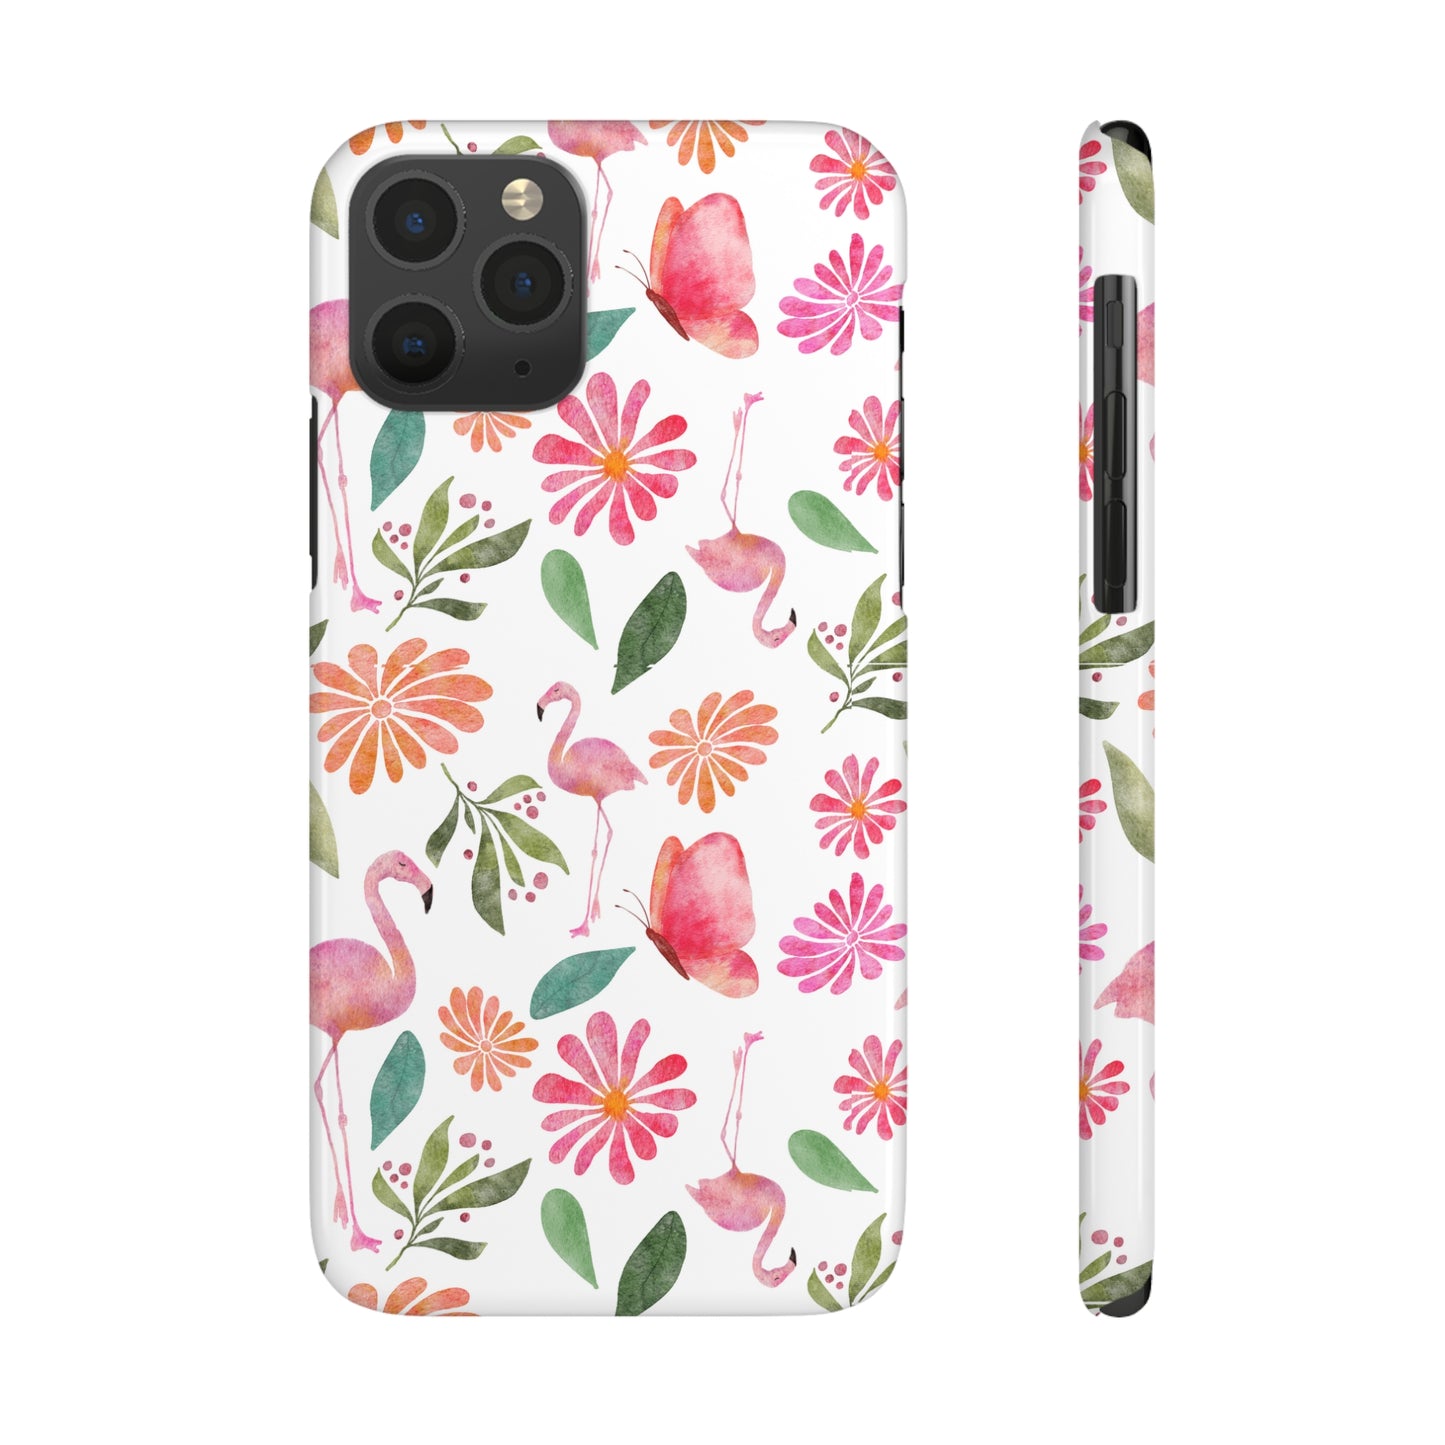 Flamingos and Butterflies Graphic Art Slim Phone Case